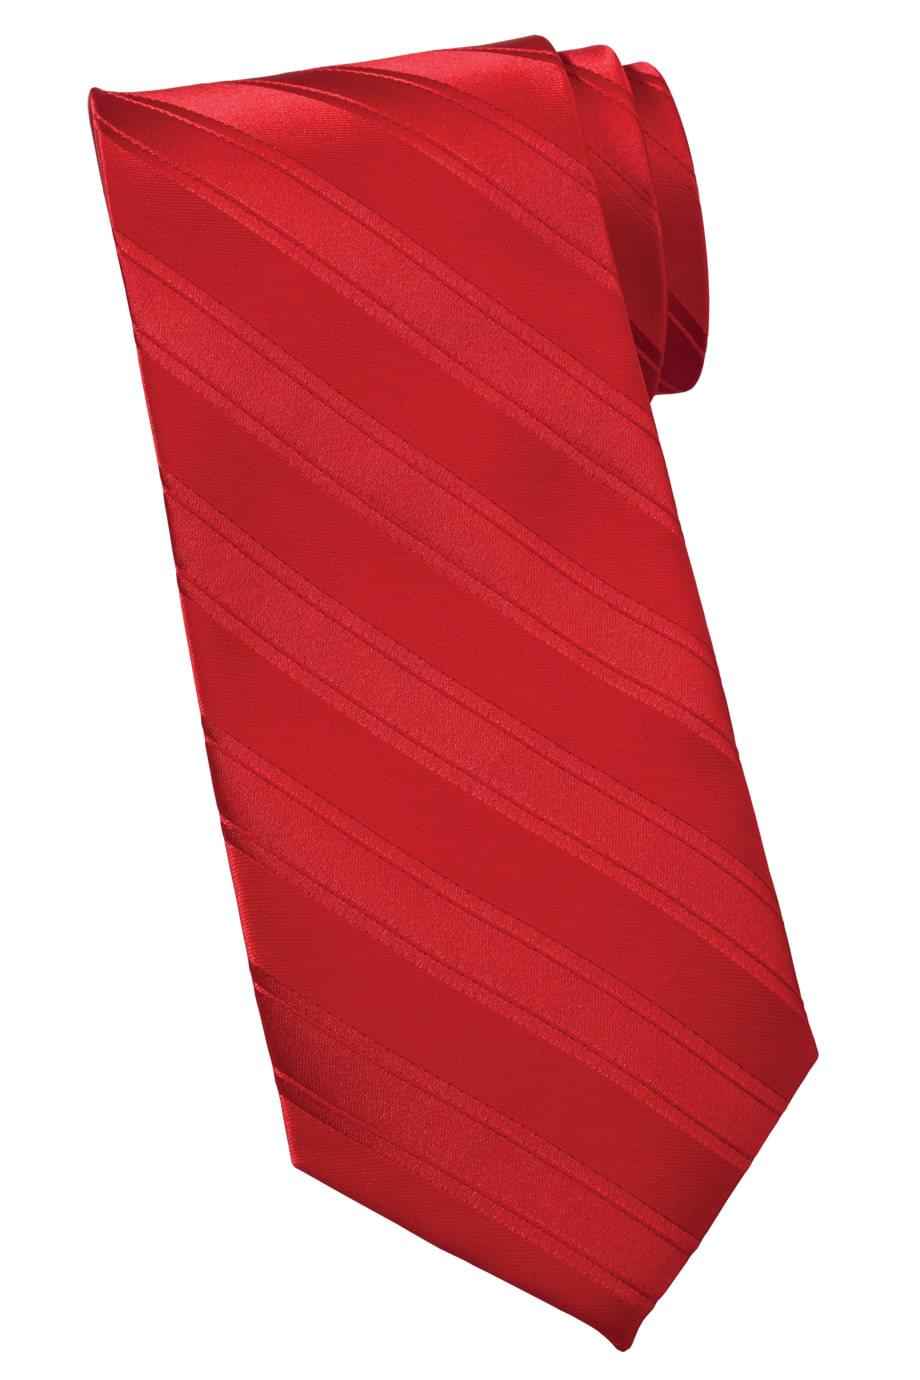 Uniforms - Polyester Pattern Tie, Tone on Tone Striped Red